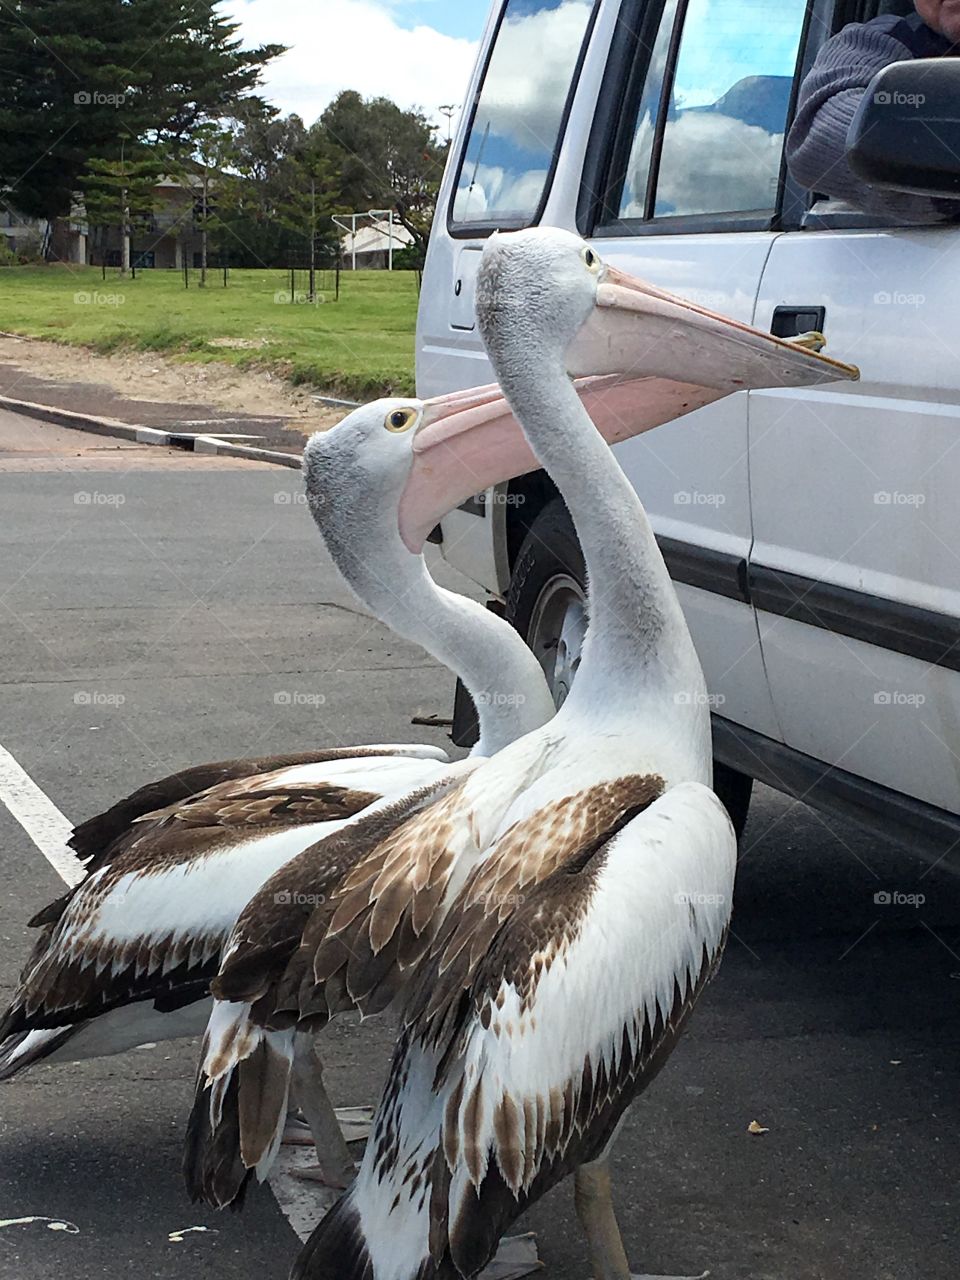 Giant Australian seagulls, not! Two large Pelicans begging for food handouts from
People in parked car at beach 